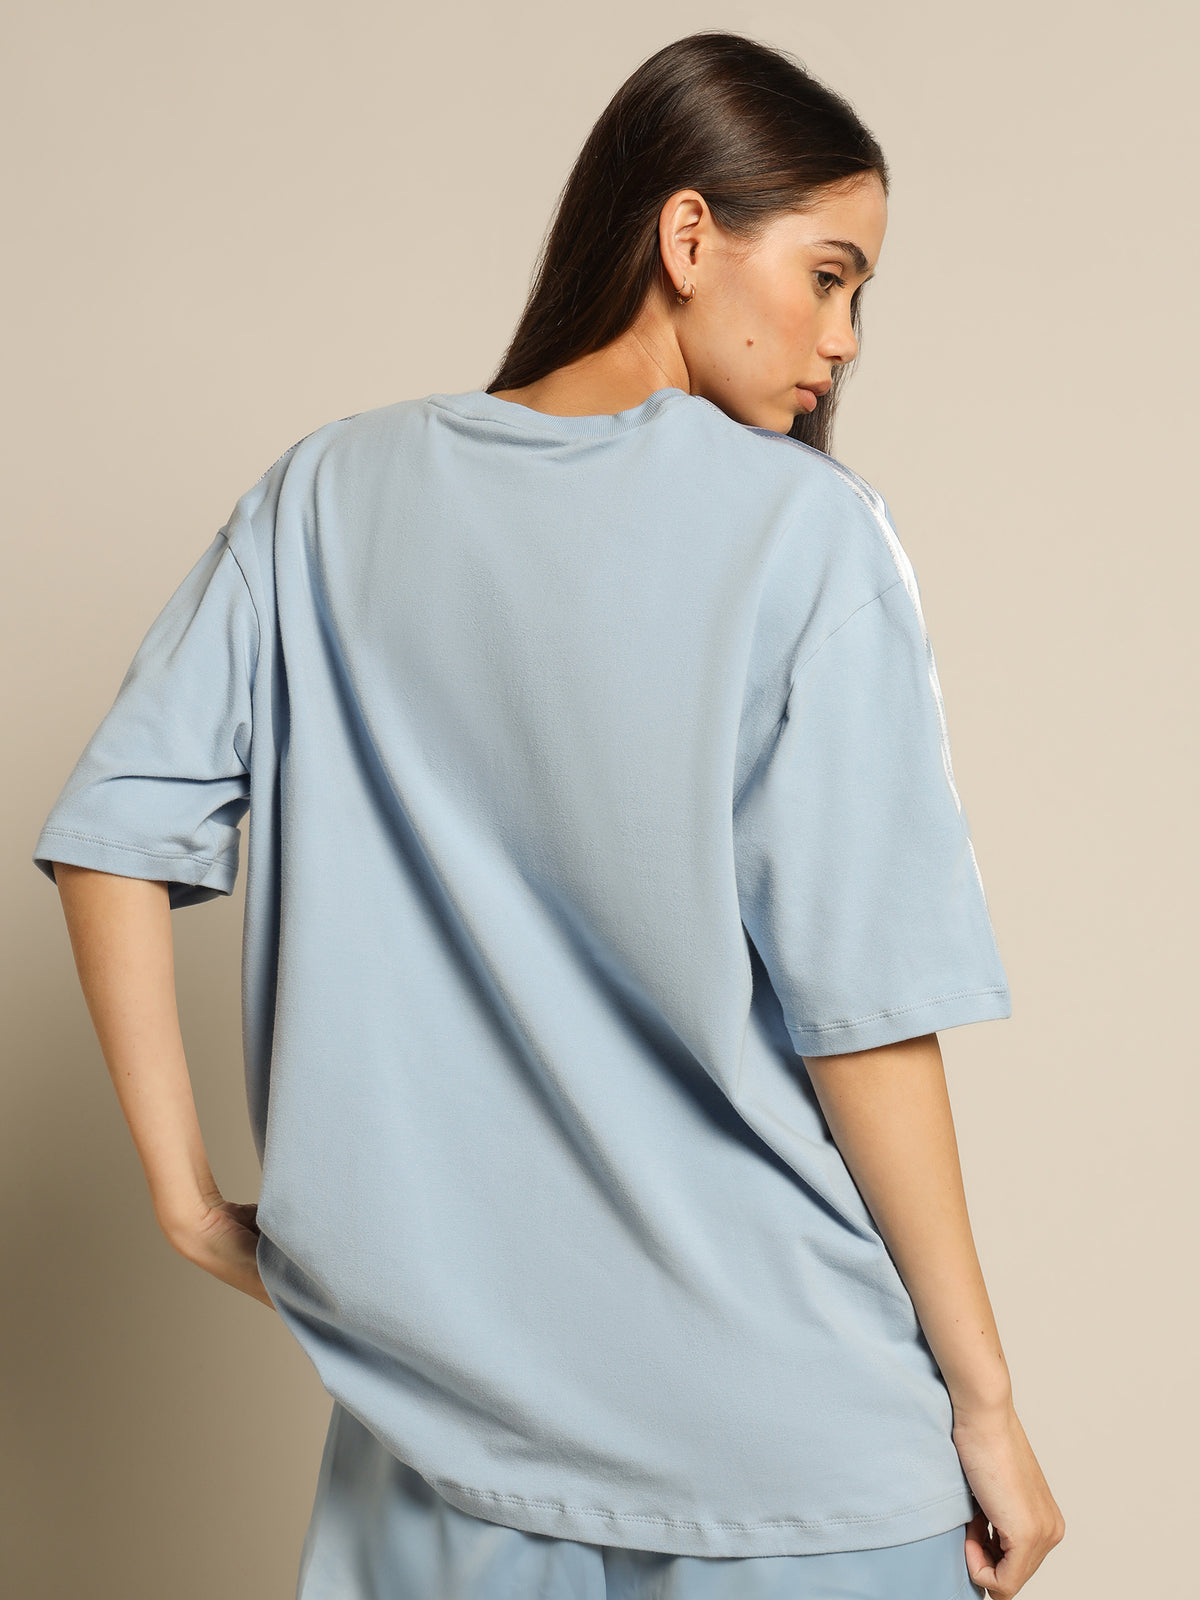 Adicolour Classic Satin Tape T-Shirt in Ambient Sky